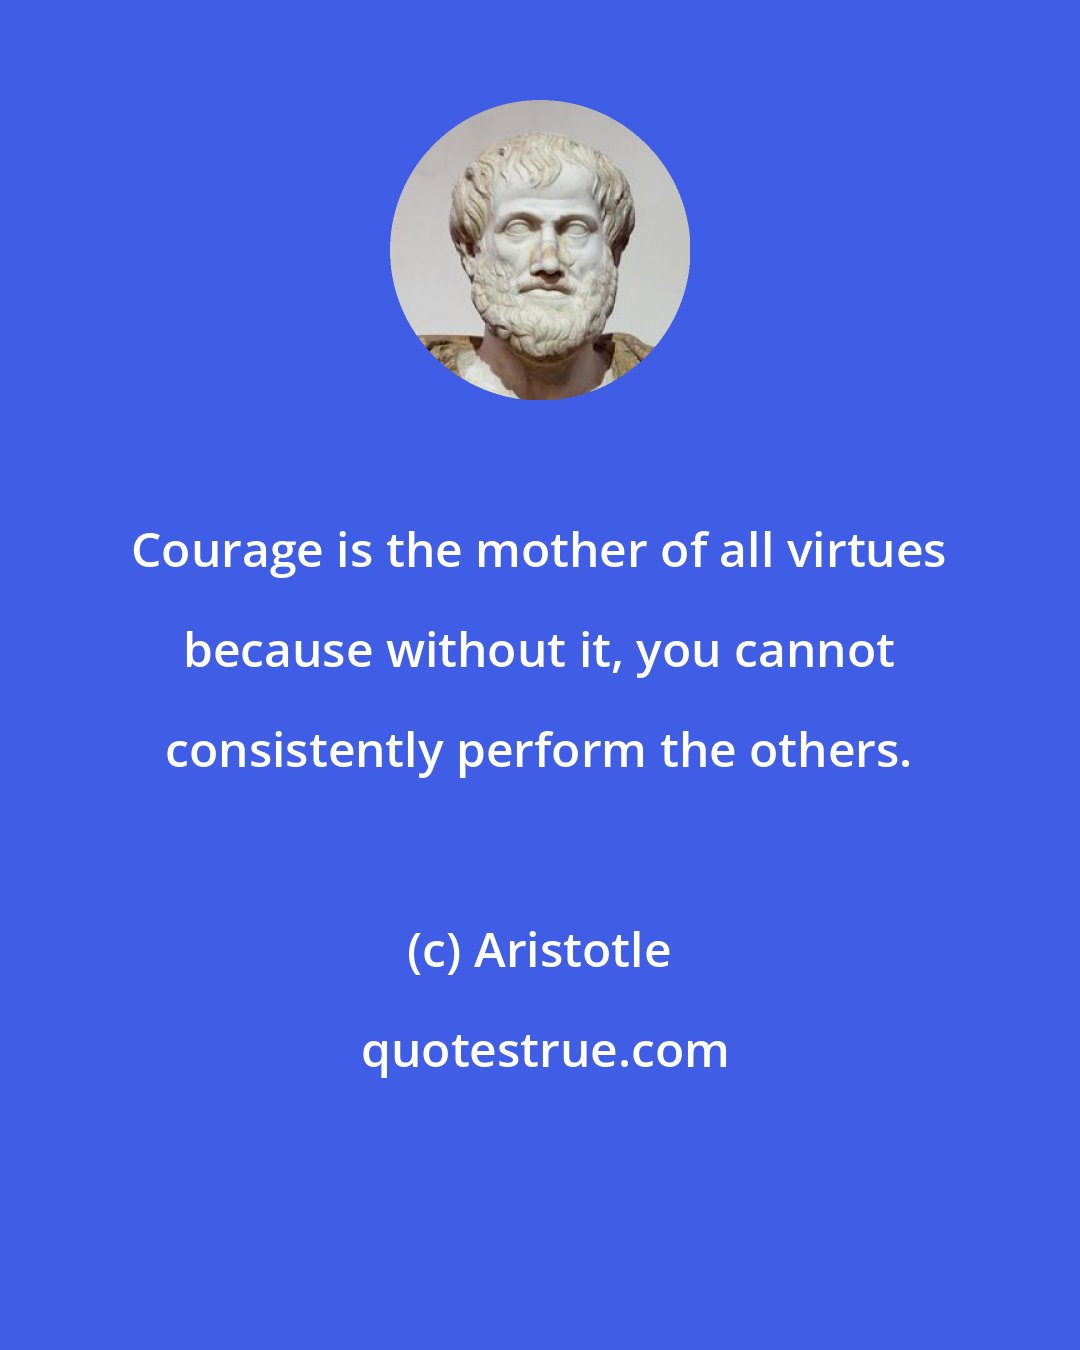 Aristotle: Courage is the mother of all virtues because without it, you cannot consistently perform the others.